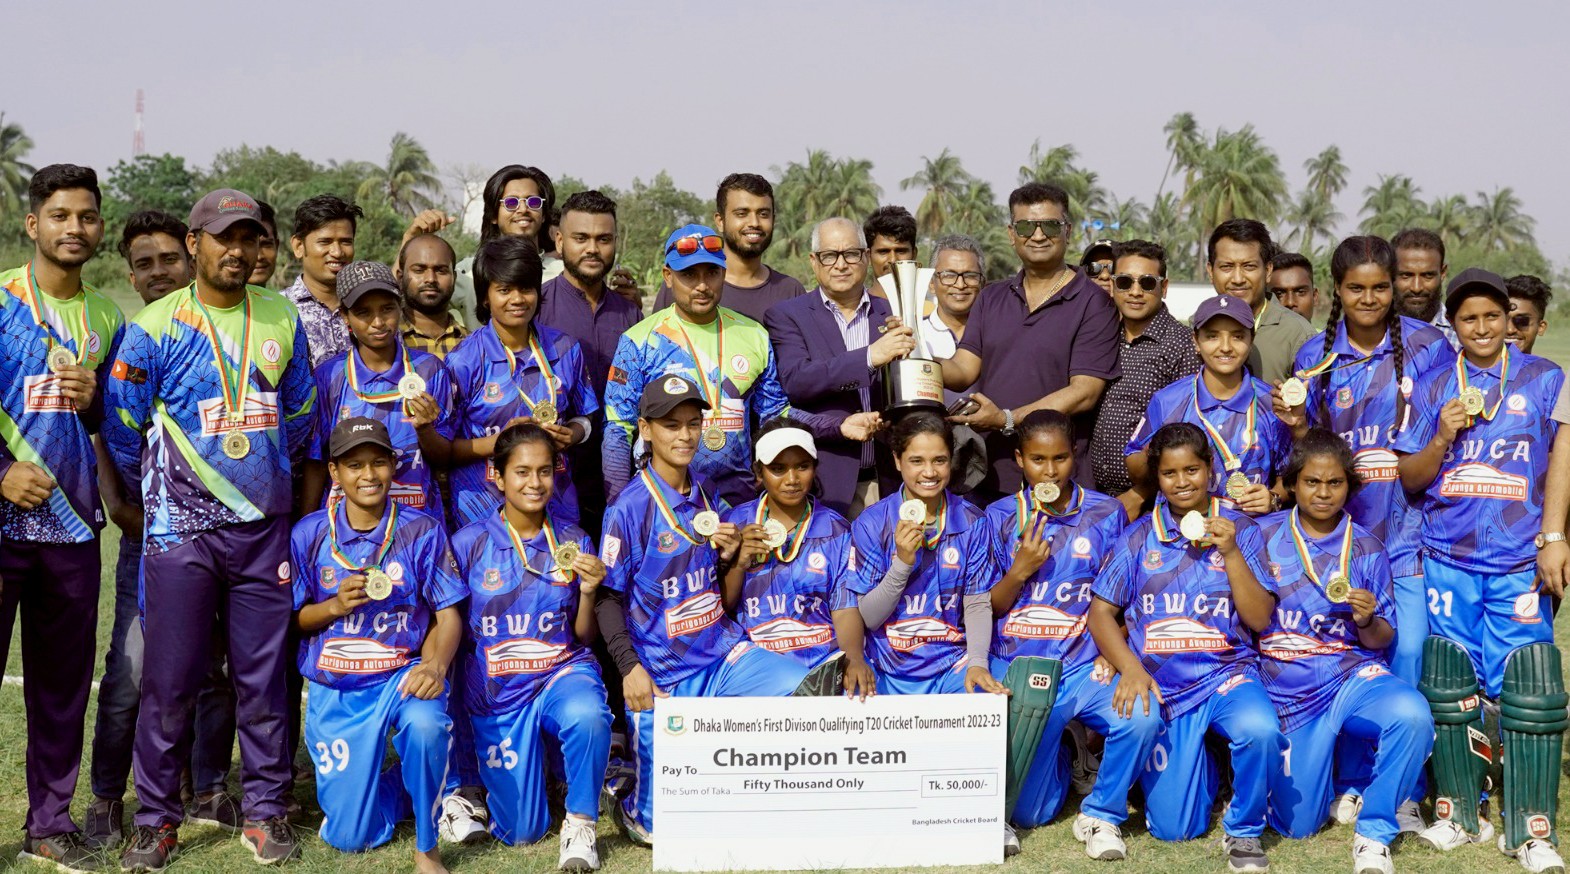 The Buriganga Women’s Cricket Academy team became champions in the Dhaka Women’s First Division Qualifying T20 Cricket Tournament